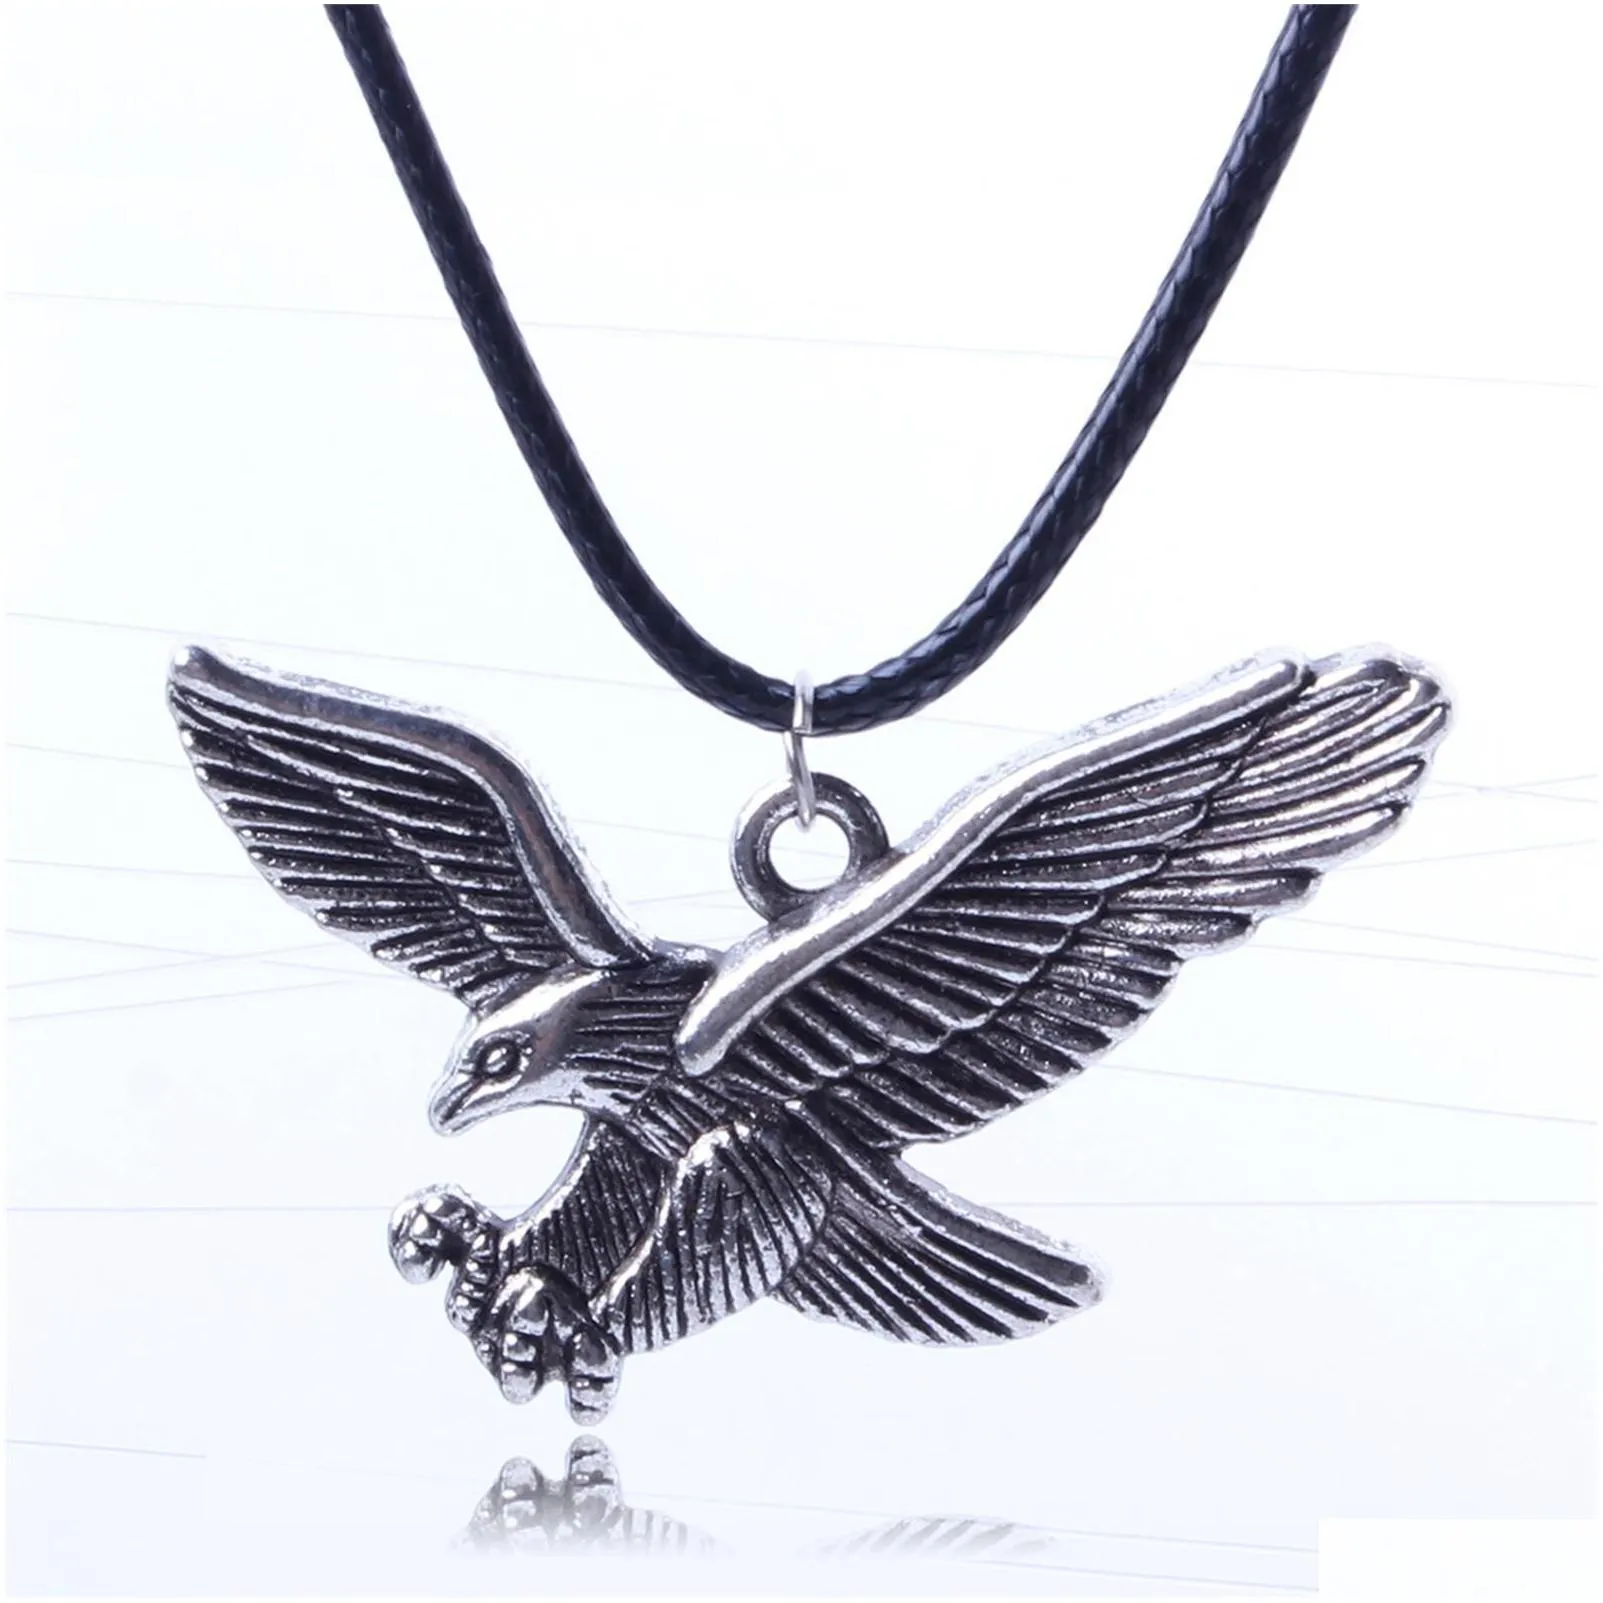  wings necklaces tortoise elements feminino clavicle chain leather necklaces pendants statement necklace